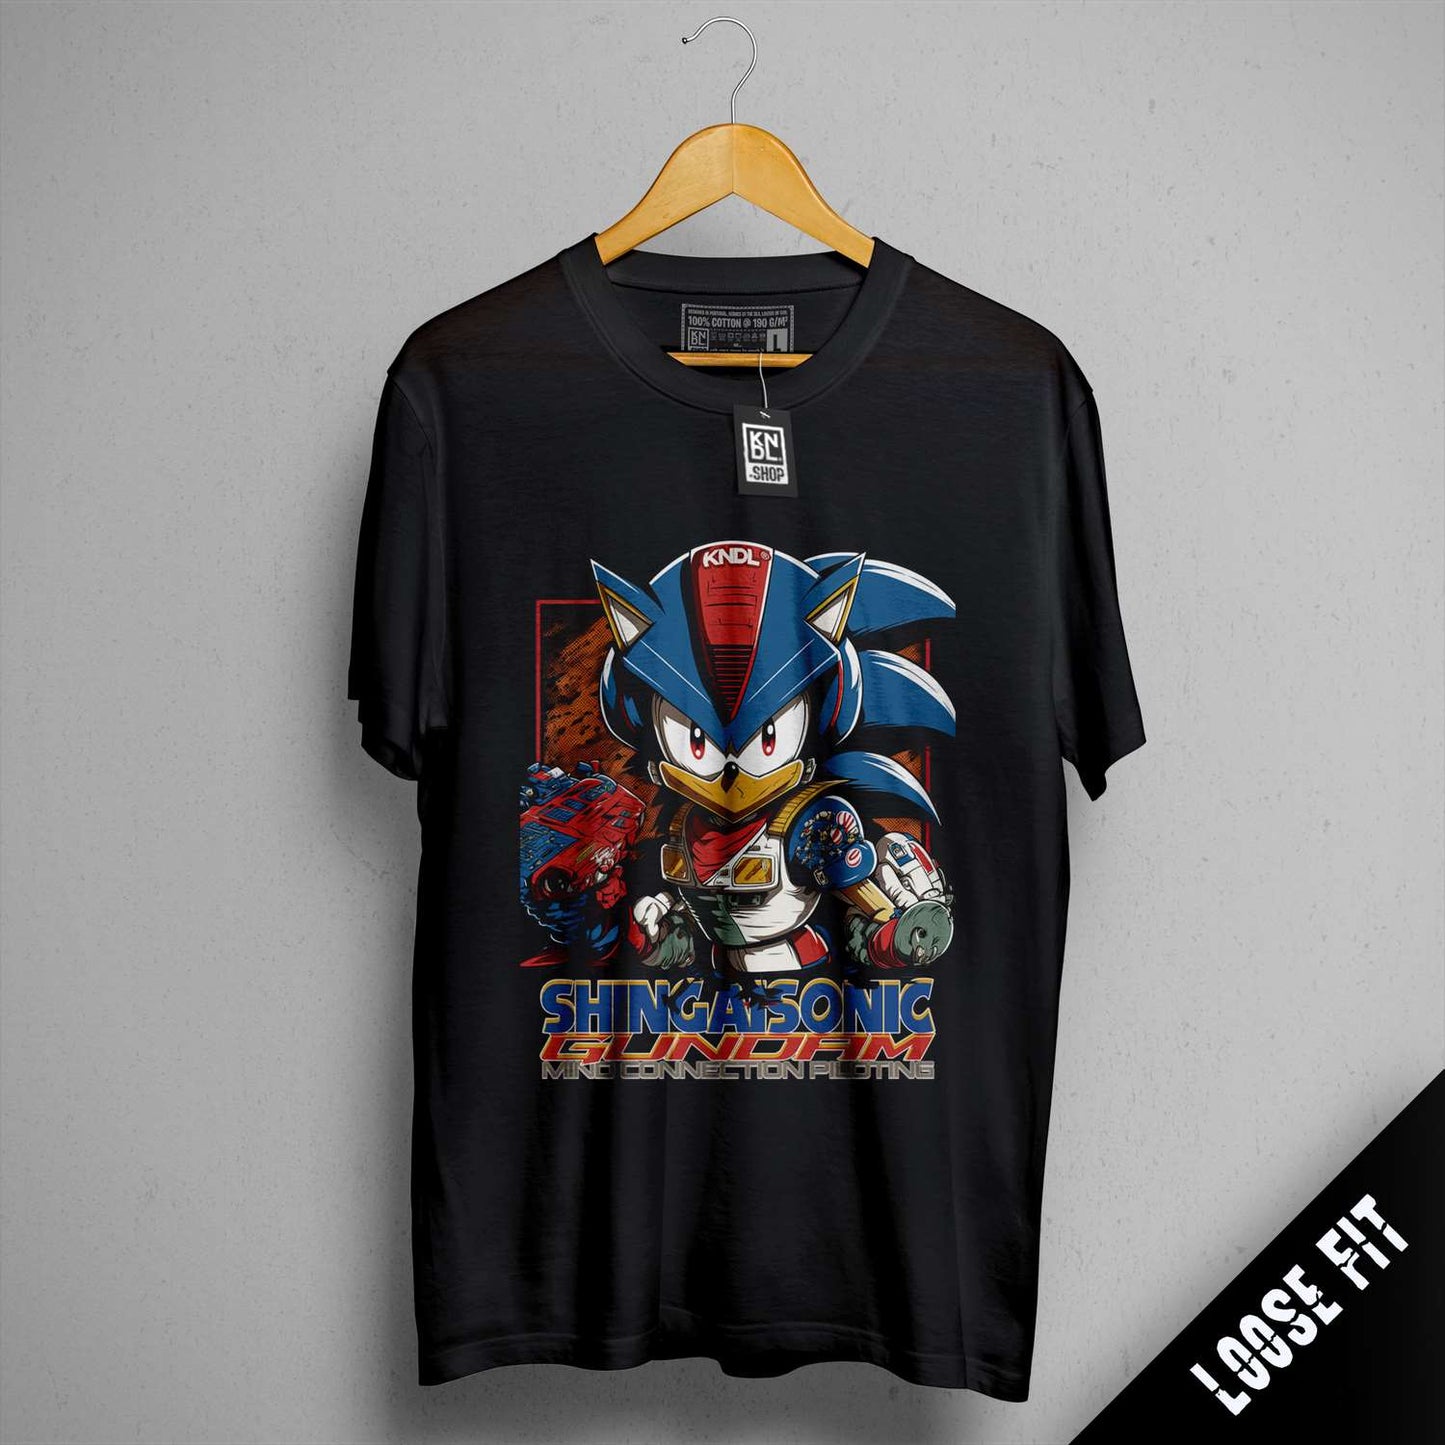 a black t - shirt with an image of sonic the hedgehog on it